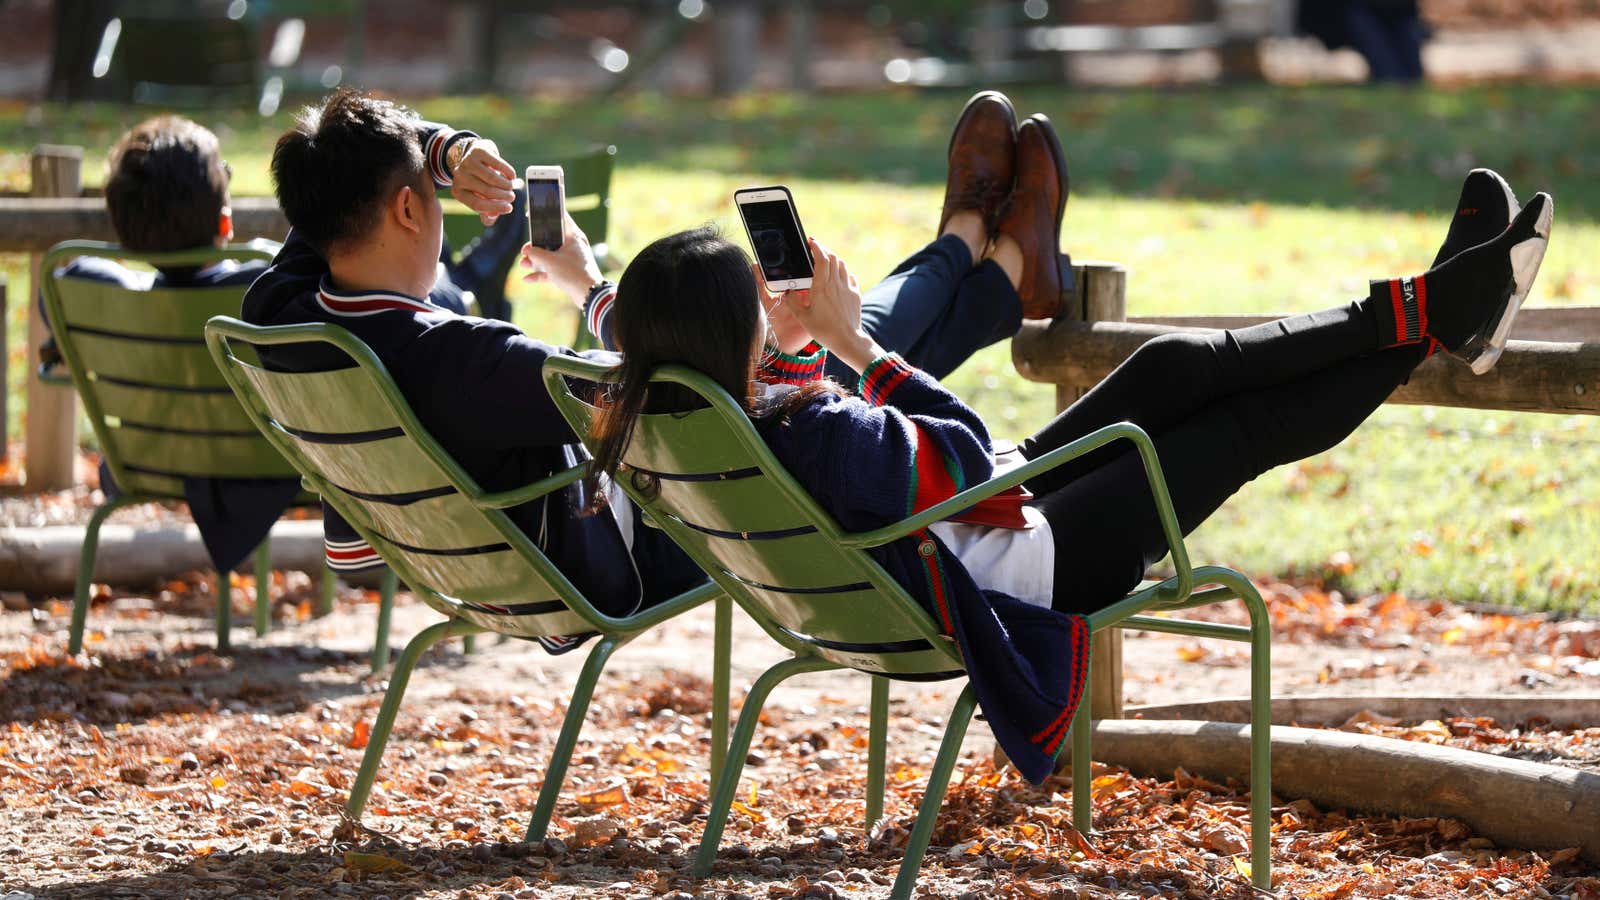 Is another digital device the solution to reduce phone use?